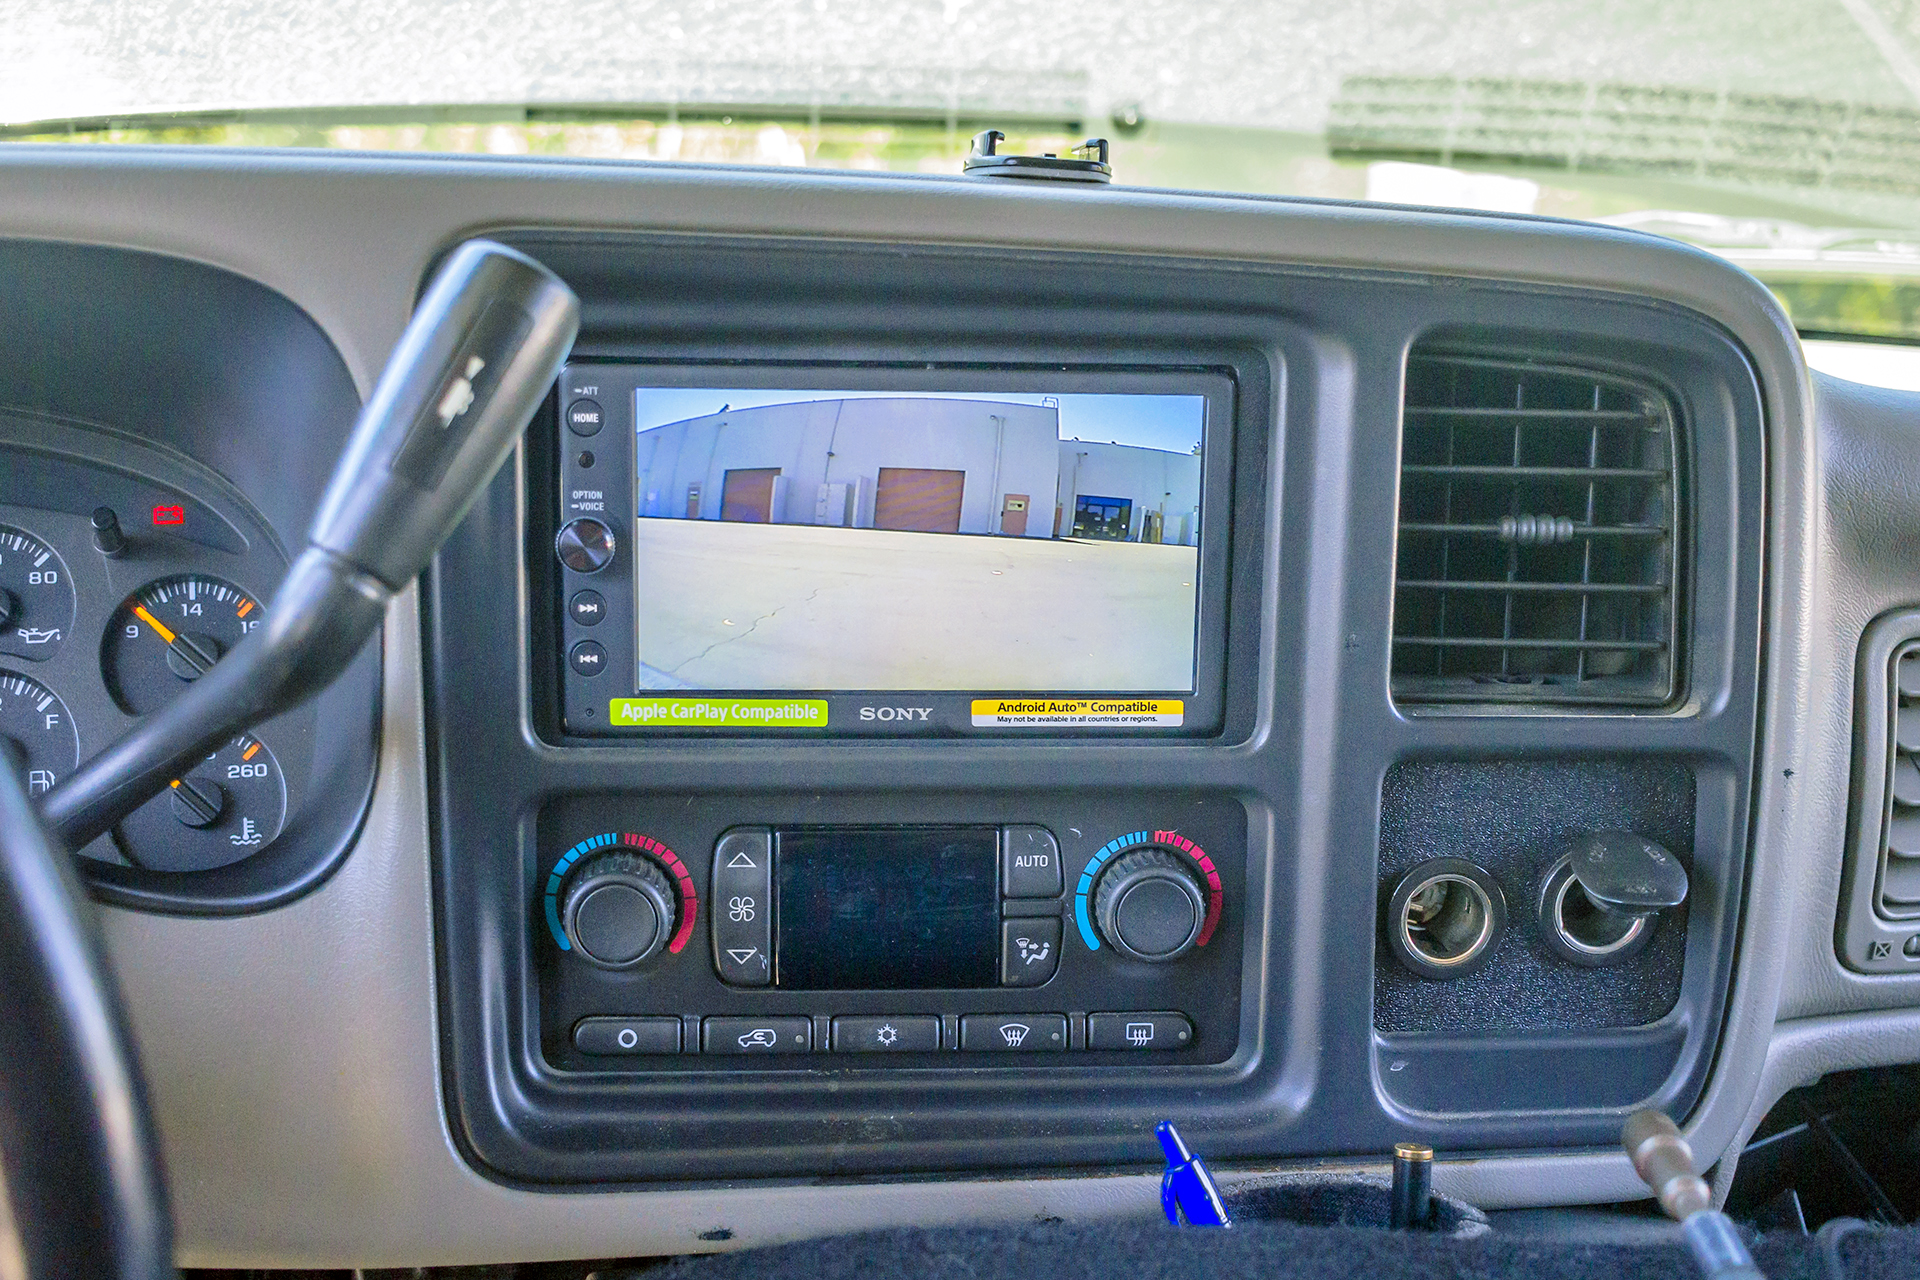 This 2004 Chevy Silverado gets an updated radio with Apple Carplay and